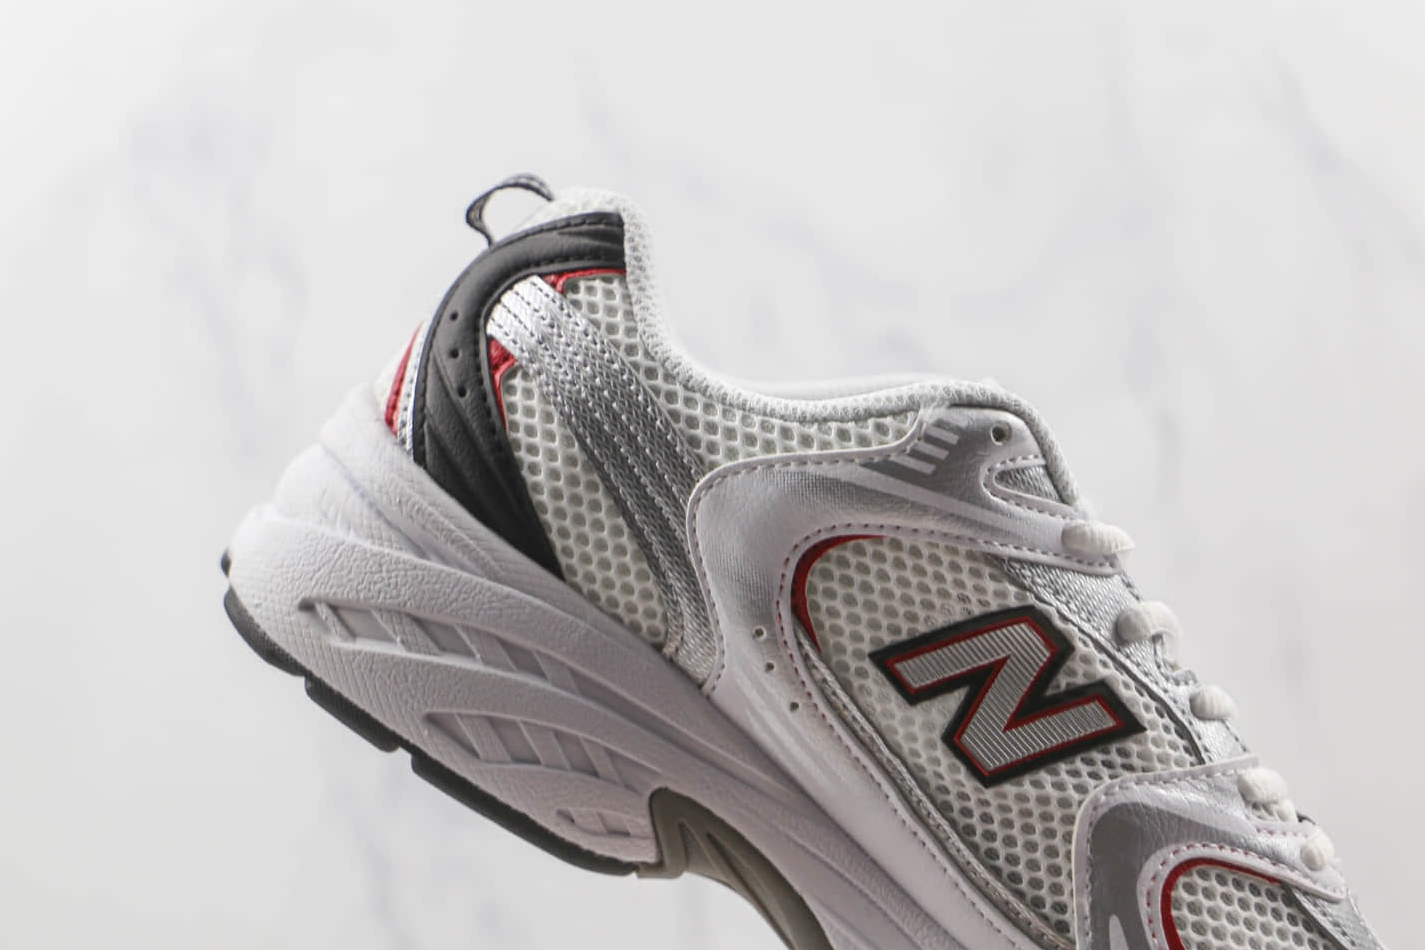 New Balance 530v2 Retro 'White Silver Red' MR530SA - Stylish and Classic Sneakers